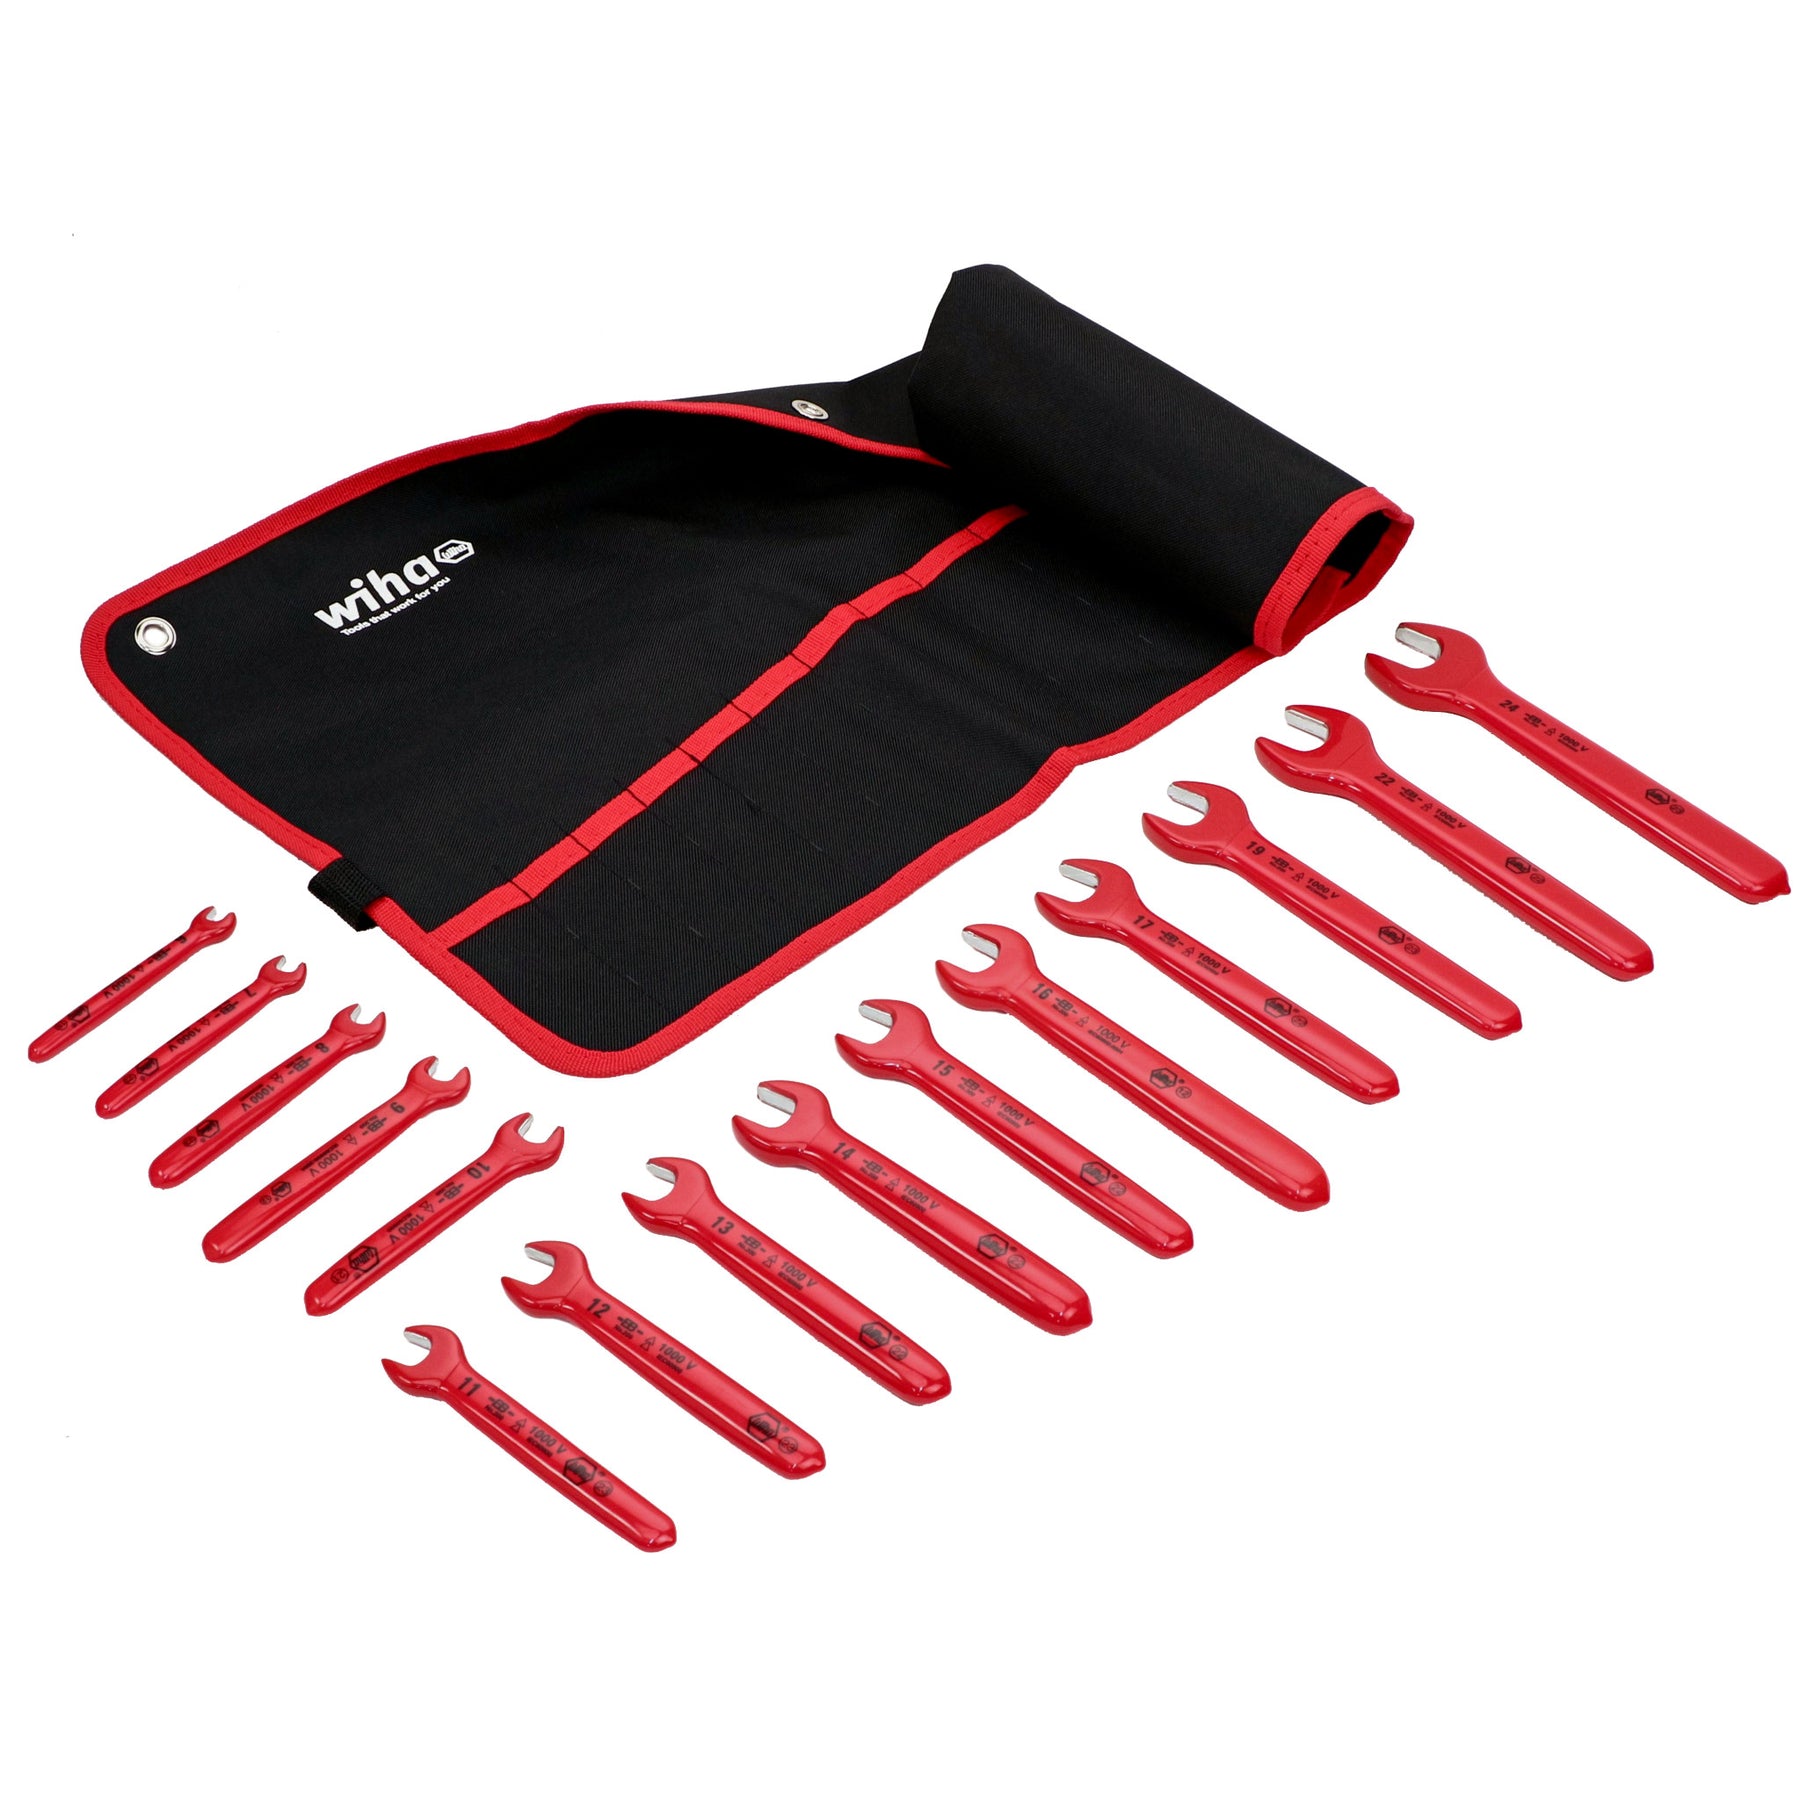 15 Piece Insulated Open End Wrench Set - Metric